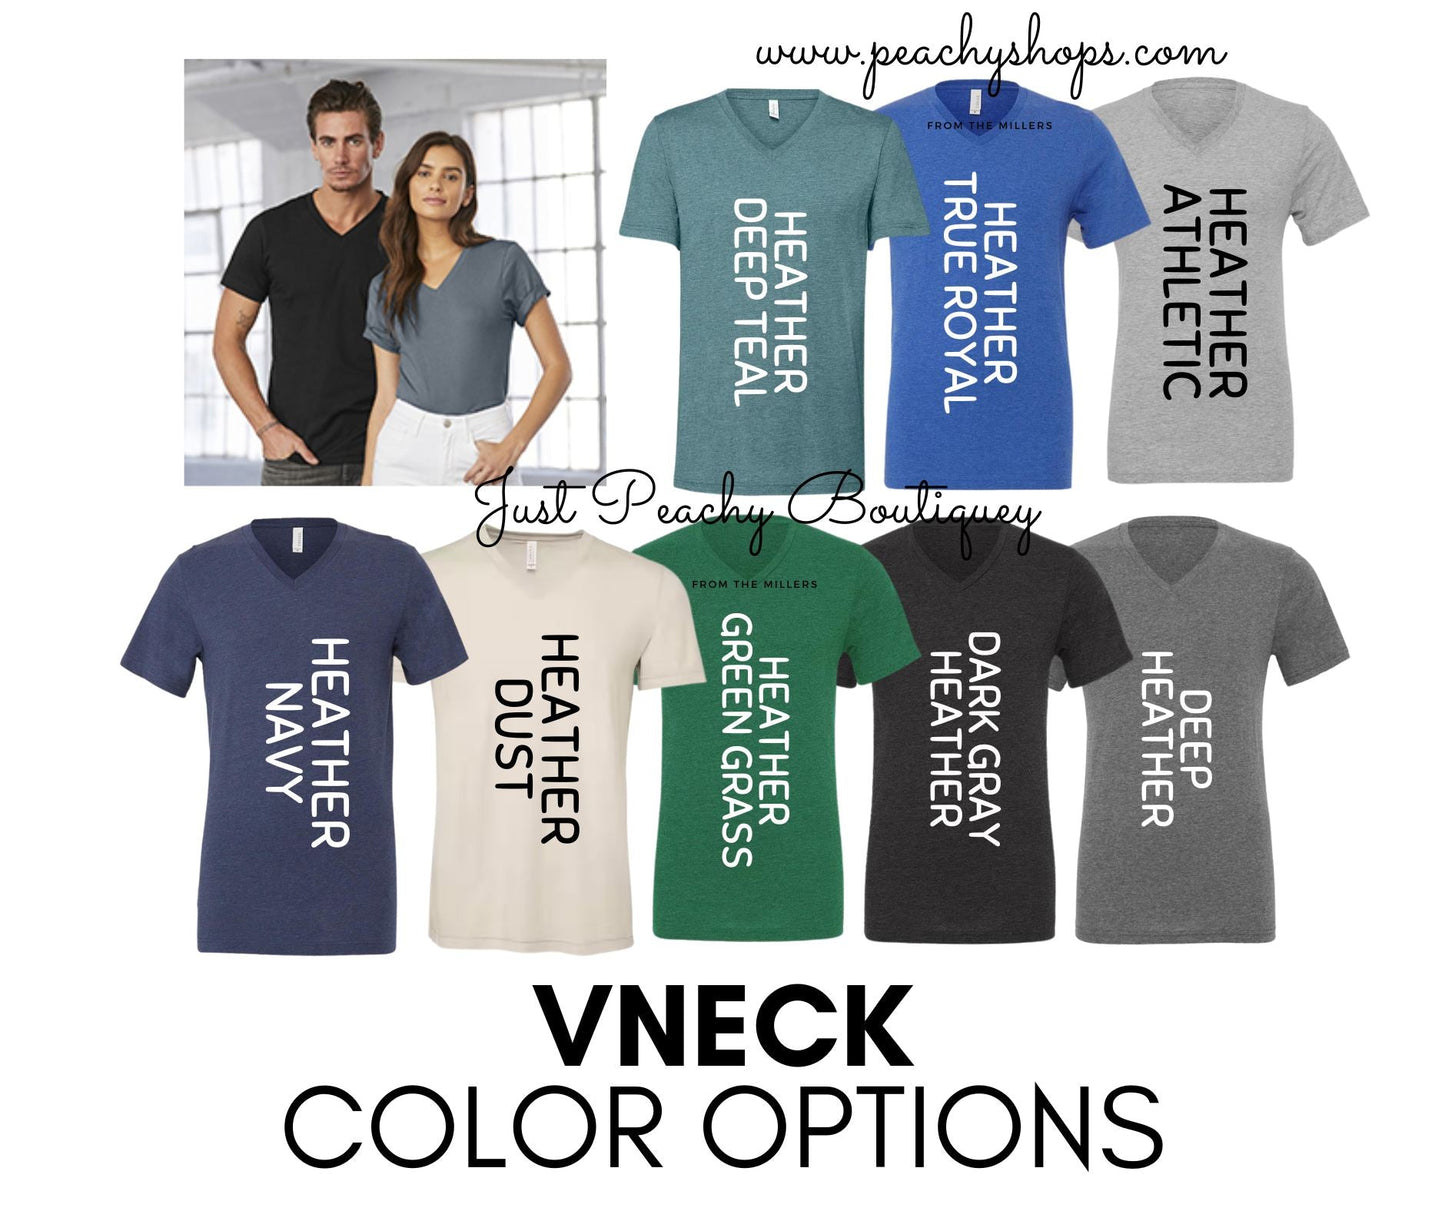 FREE RANGE UNIVERSITY T-SHIRT OR PICK FROM 200 COLOR & STYLE OPTIONS! - TAT 4-7 DAYS